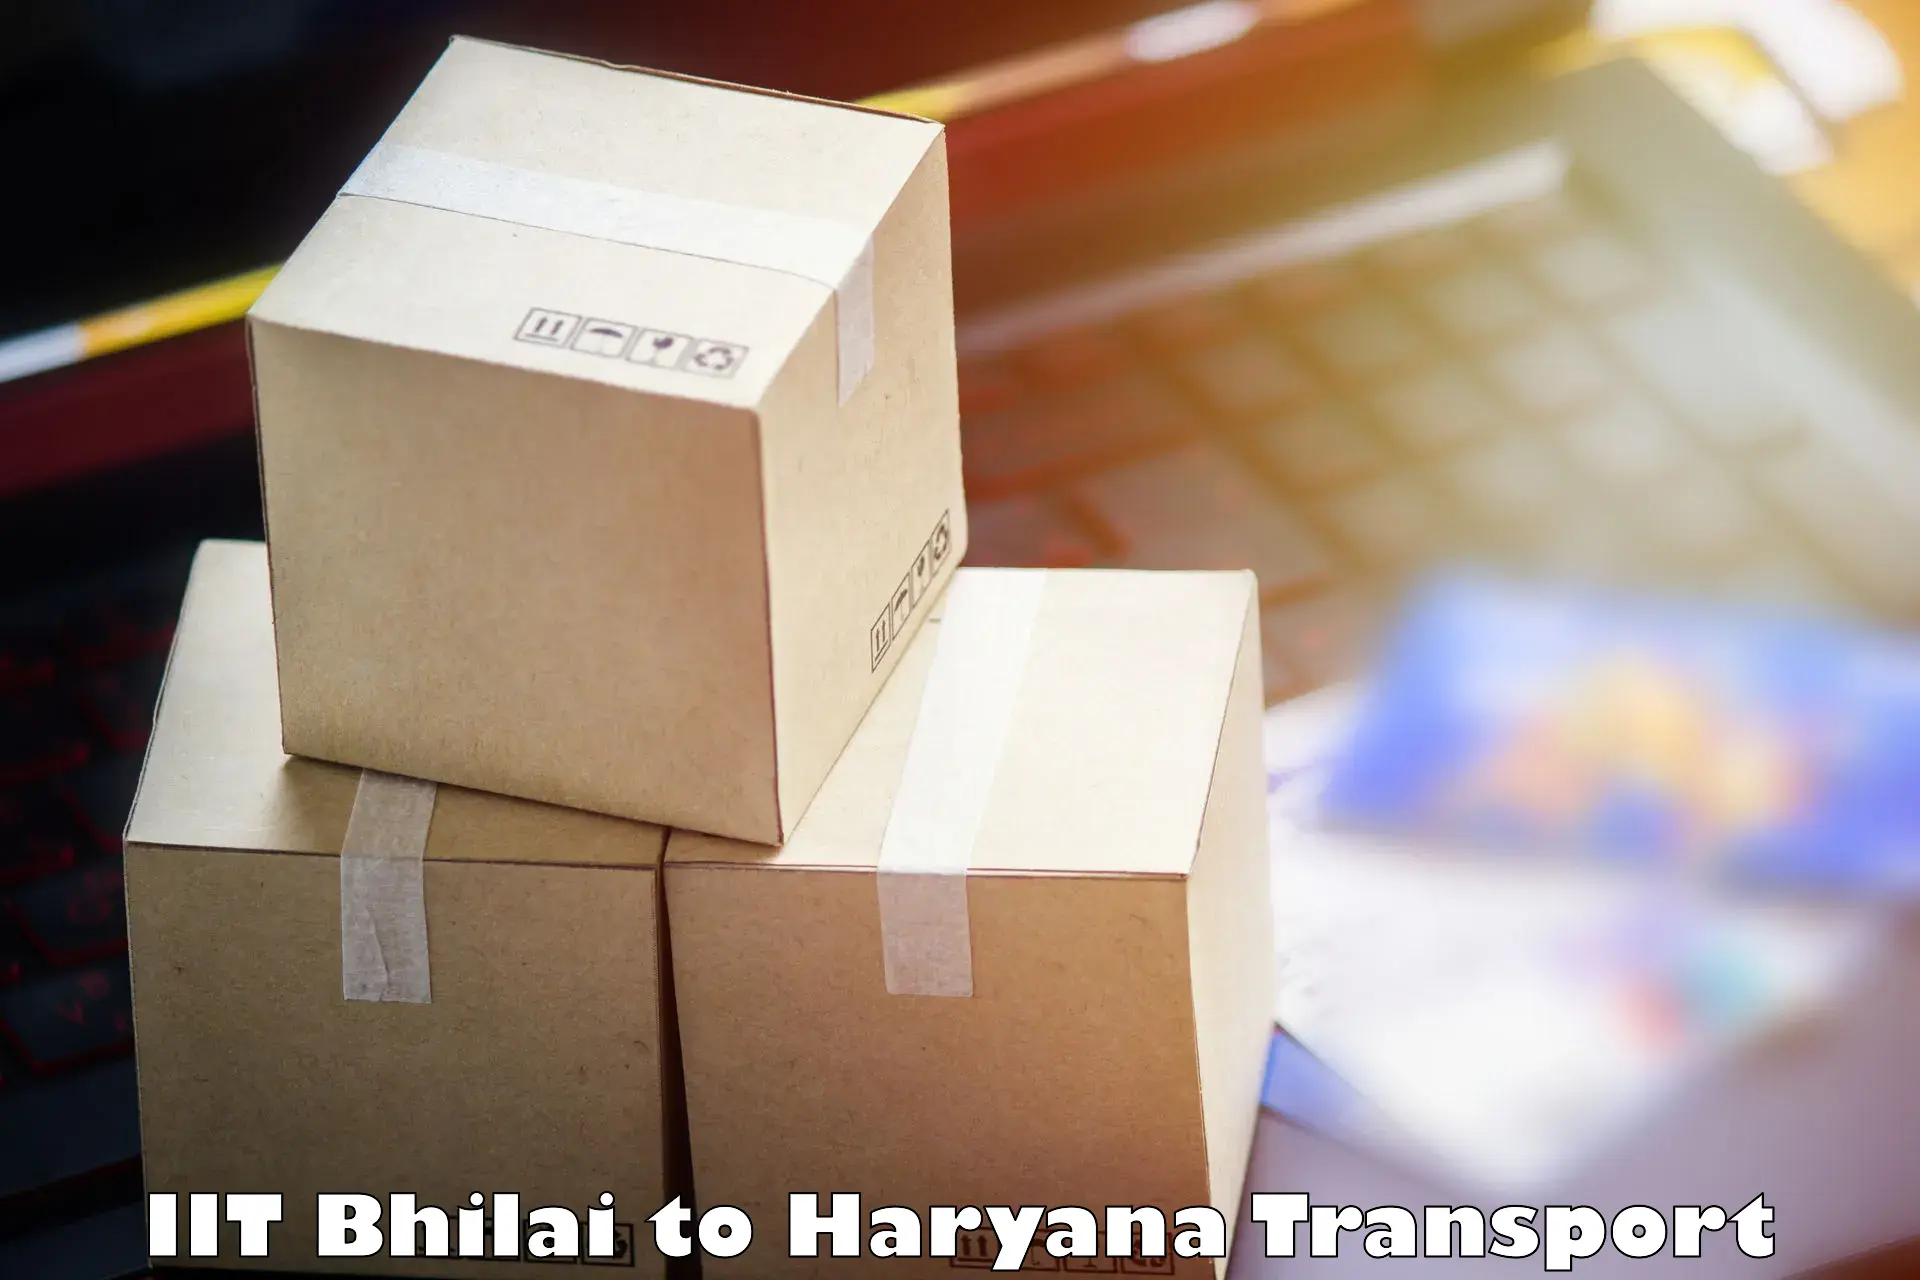 Parcel transport services IIT Bhilai to Odhan